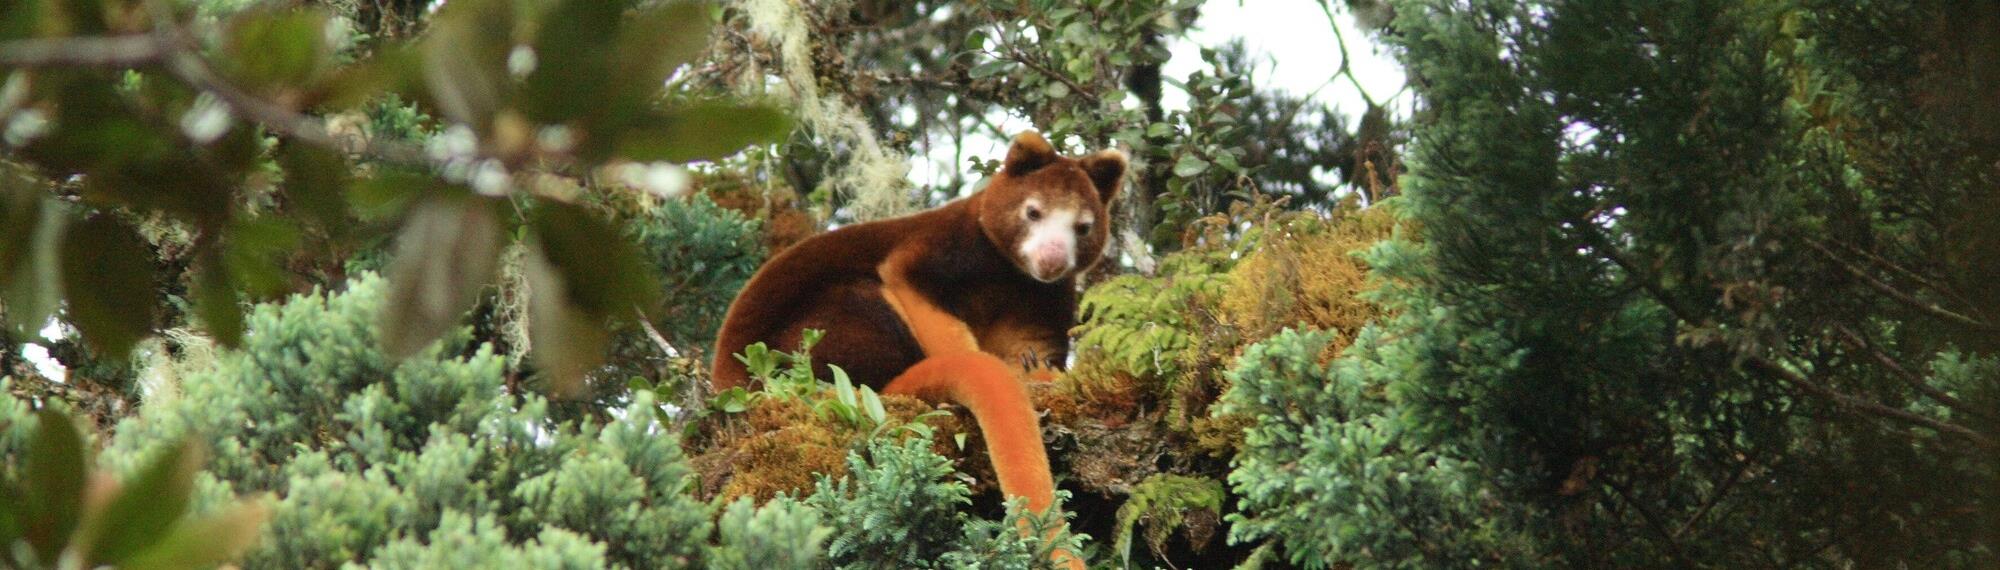 Tree-kangaroo in a tree surrounded by lush greenery